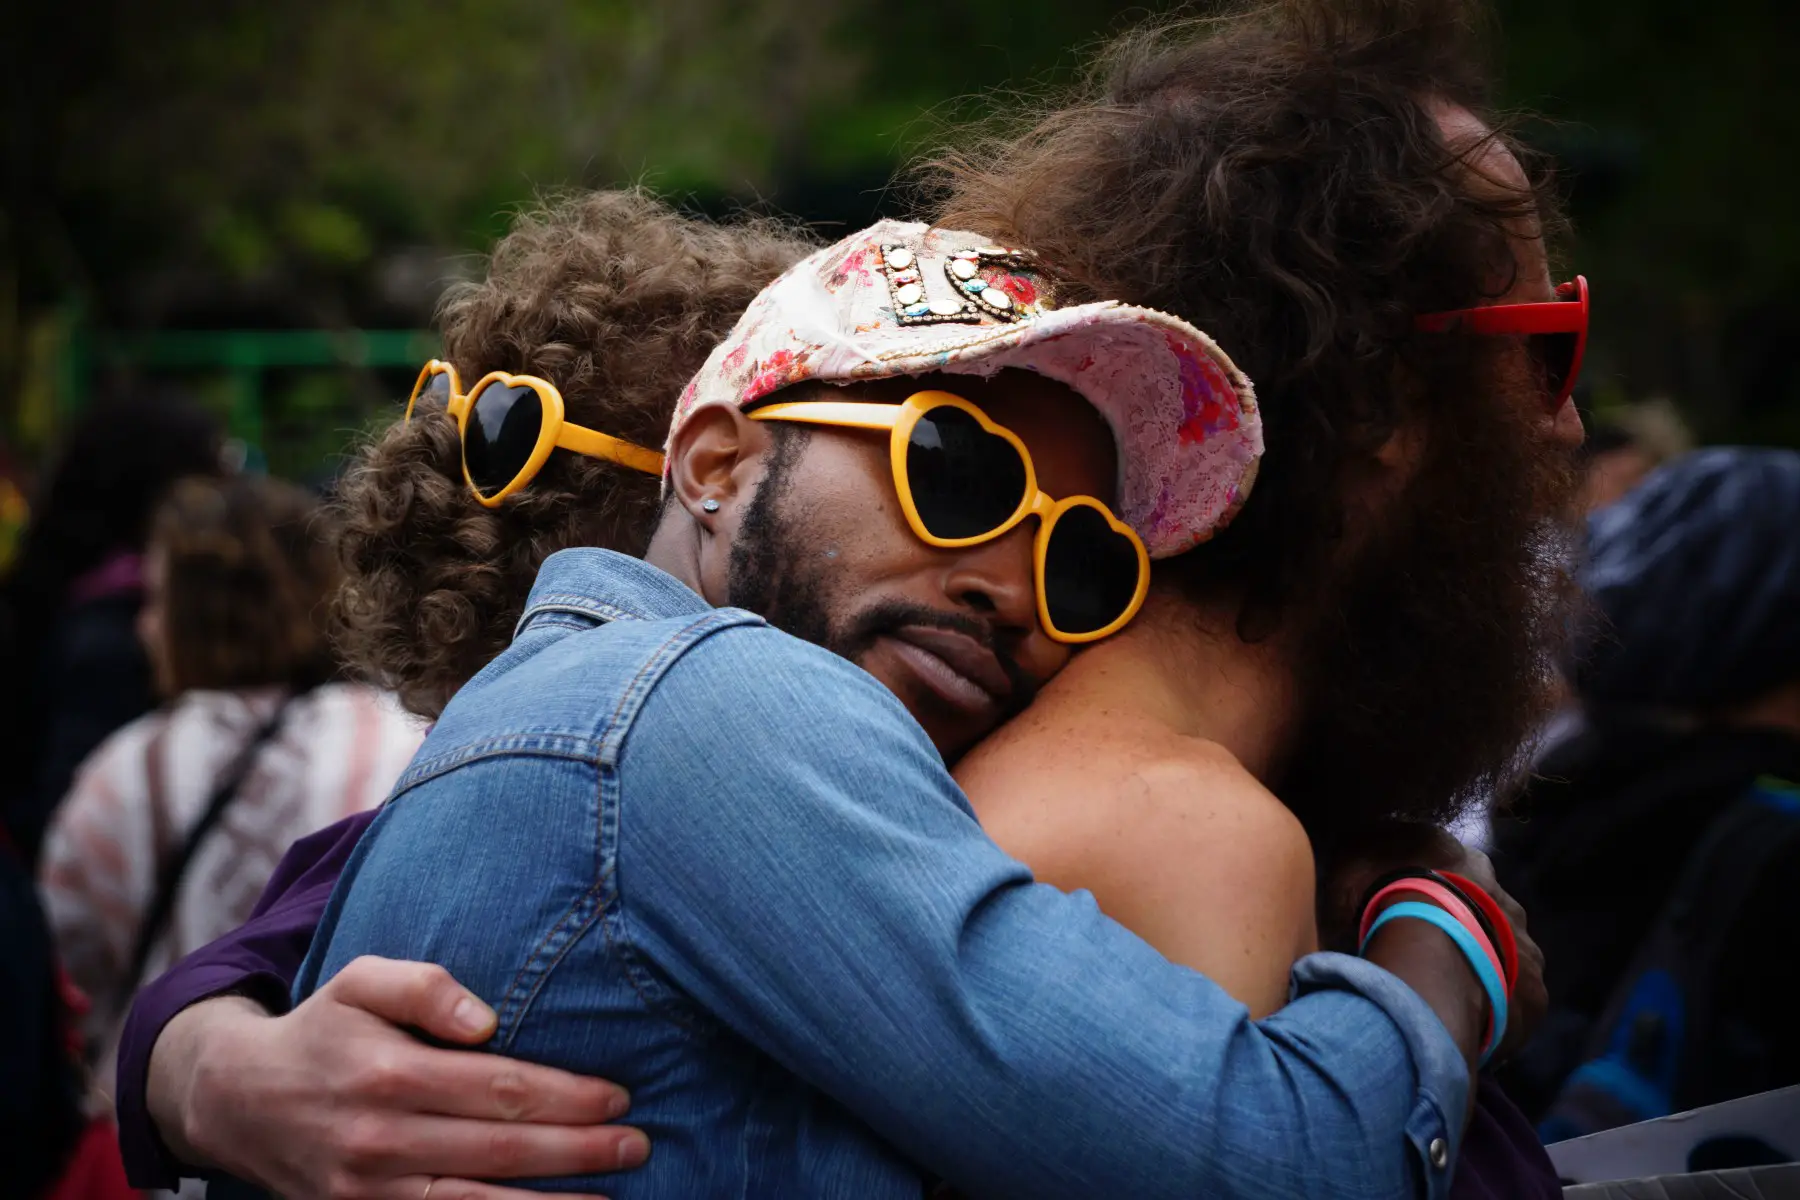 Friends or lovers embraced in a tight hug. They're all wearing heart-shaped sunglasses.